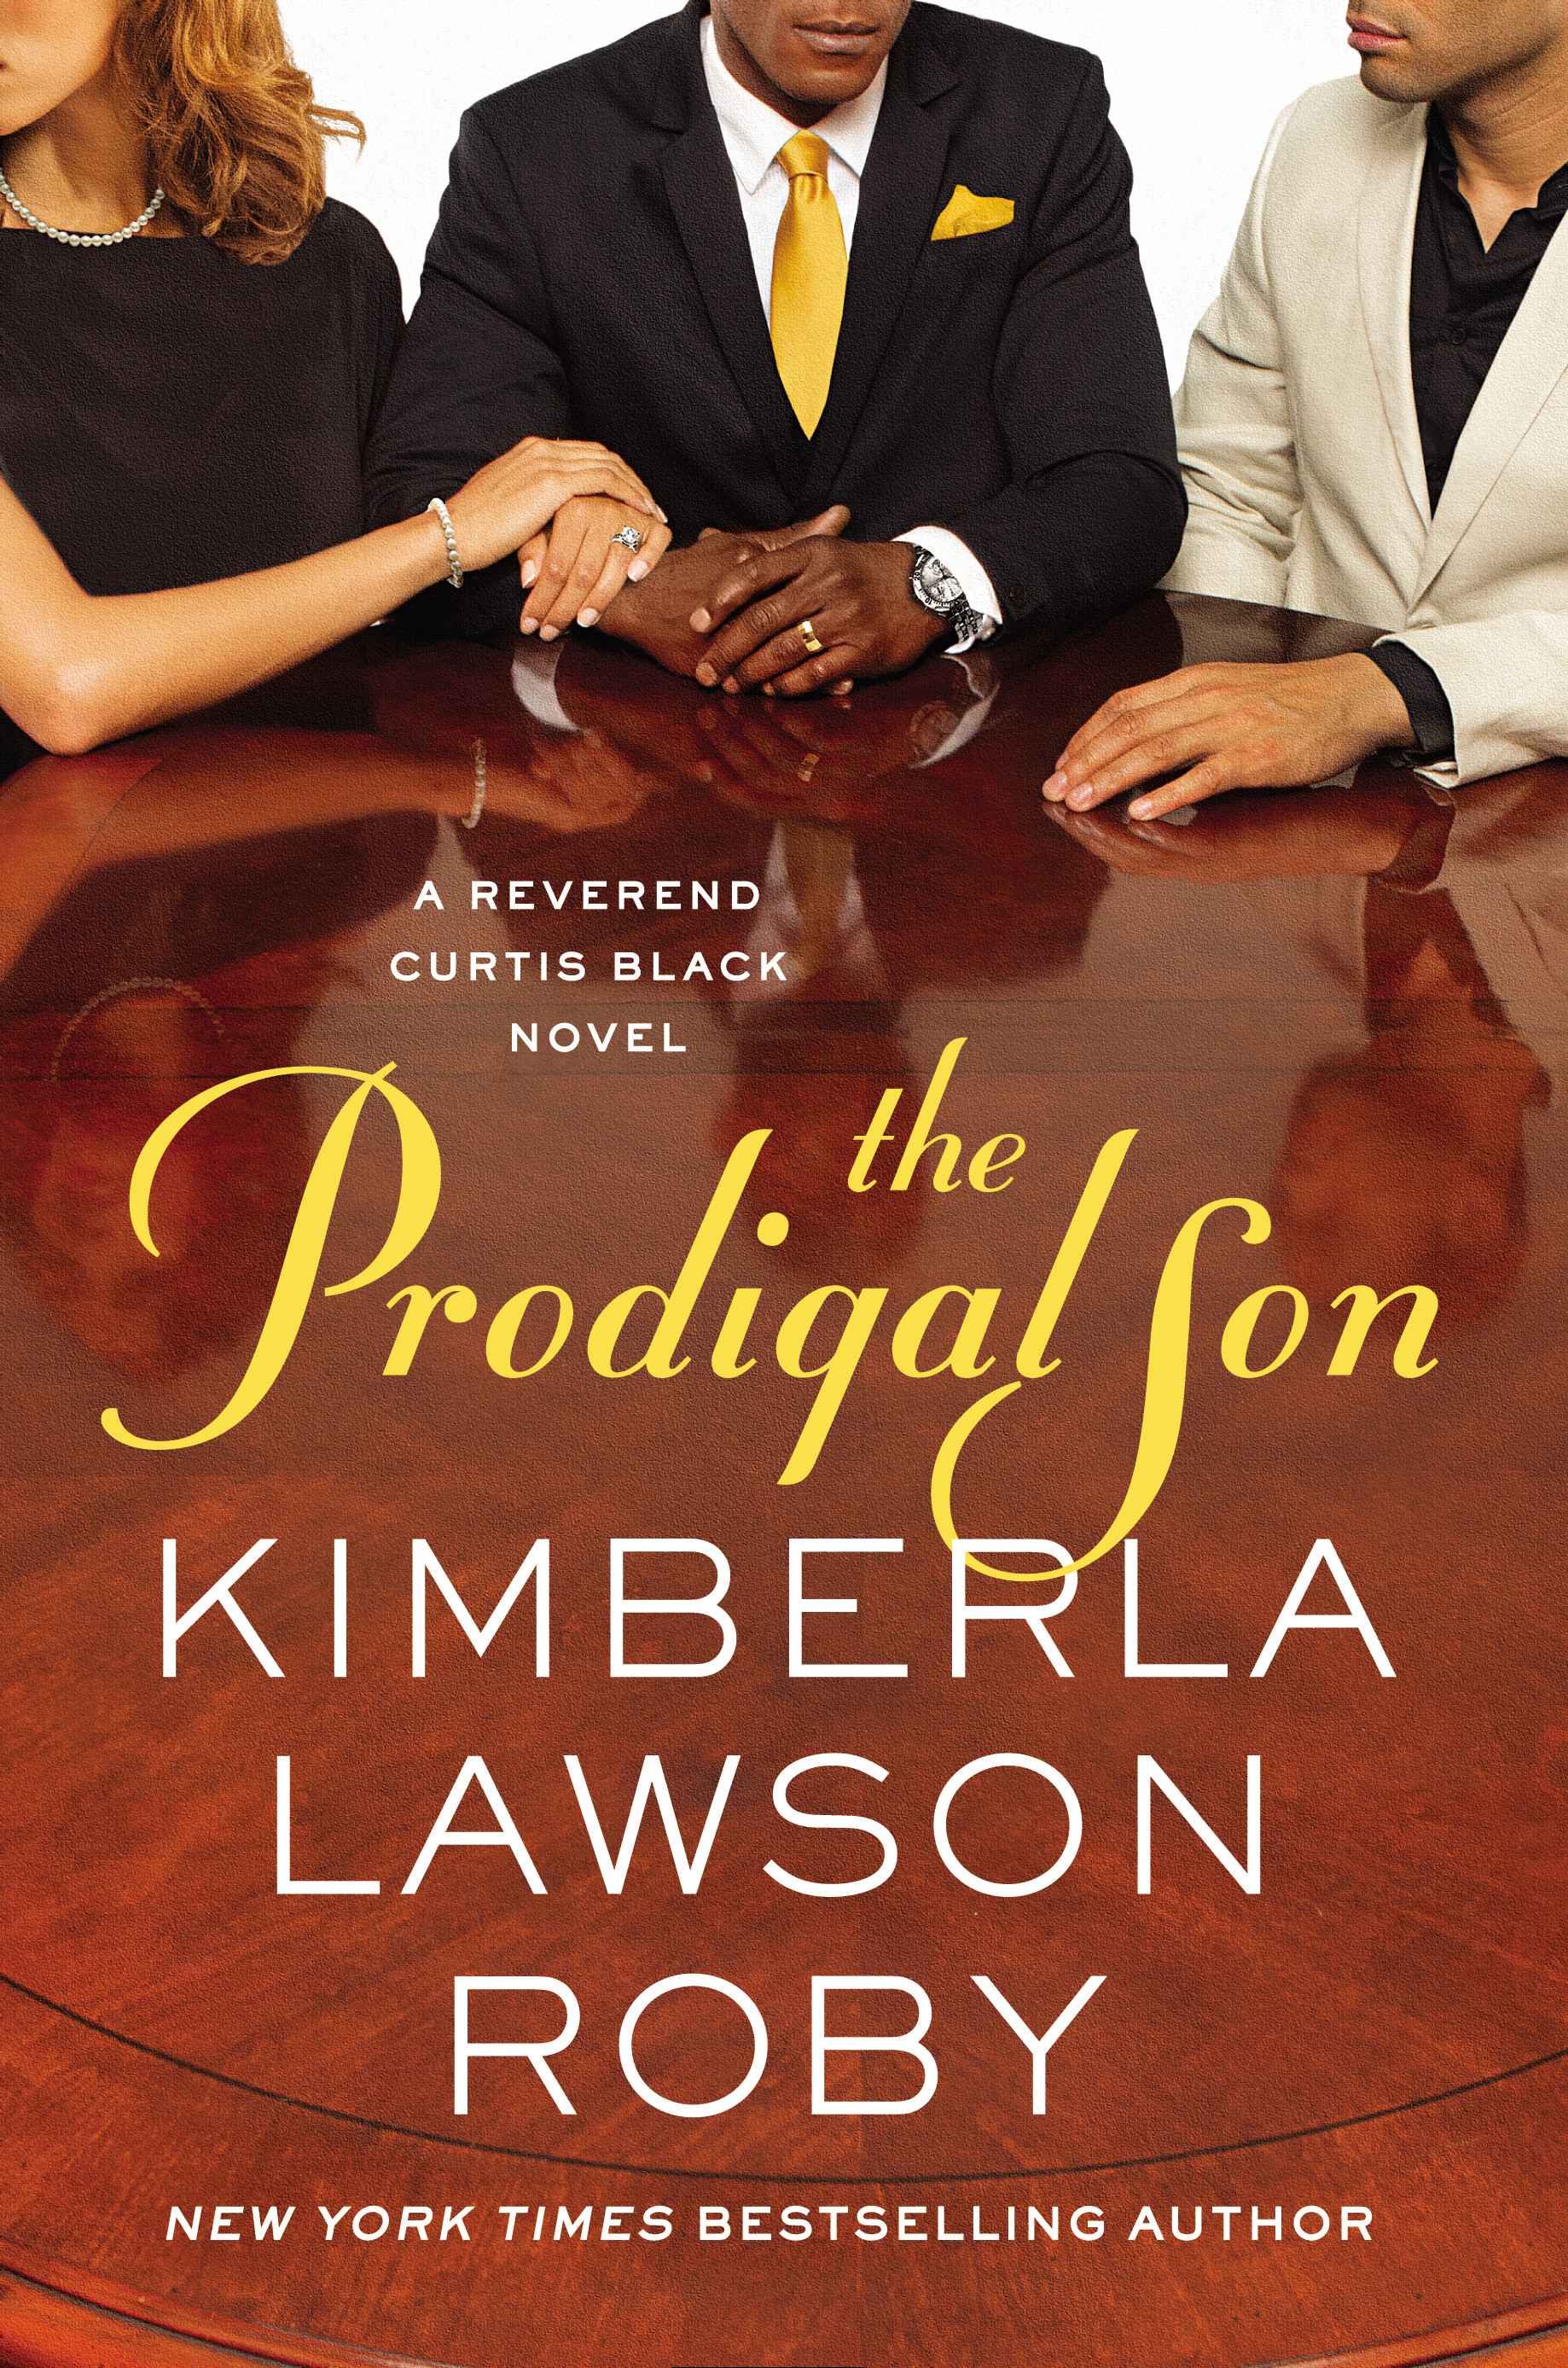 Kimberla Lawson Roby’s The Prodigal Son is skippable